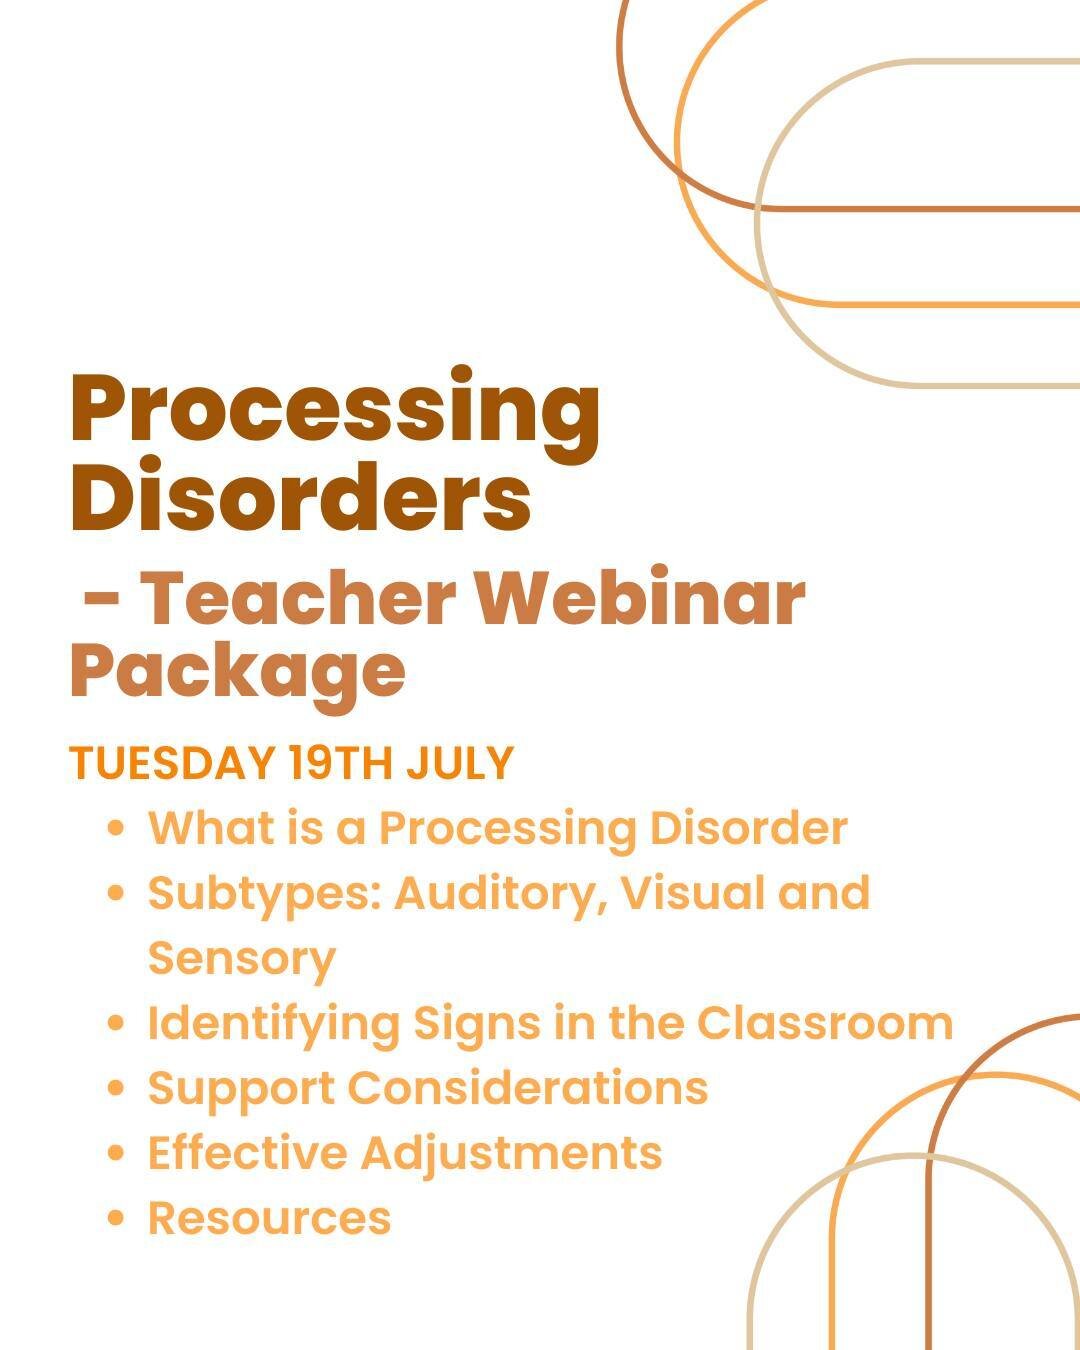 Processing Disorders - Teacher Webinar Package $53.99

Packages includes:
- Unlimited and Immediate Access to 2 Hour Webinar Recording
- Printable Presentation Slides
- Processing Disorders Effective Adjustments and Accommodations eBook
- Certificate